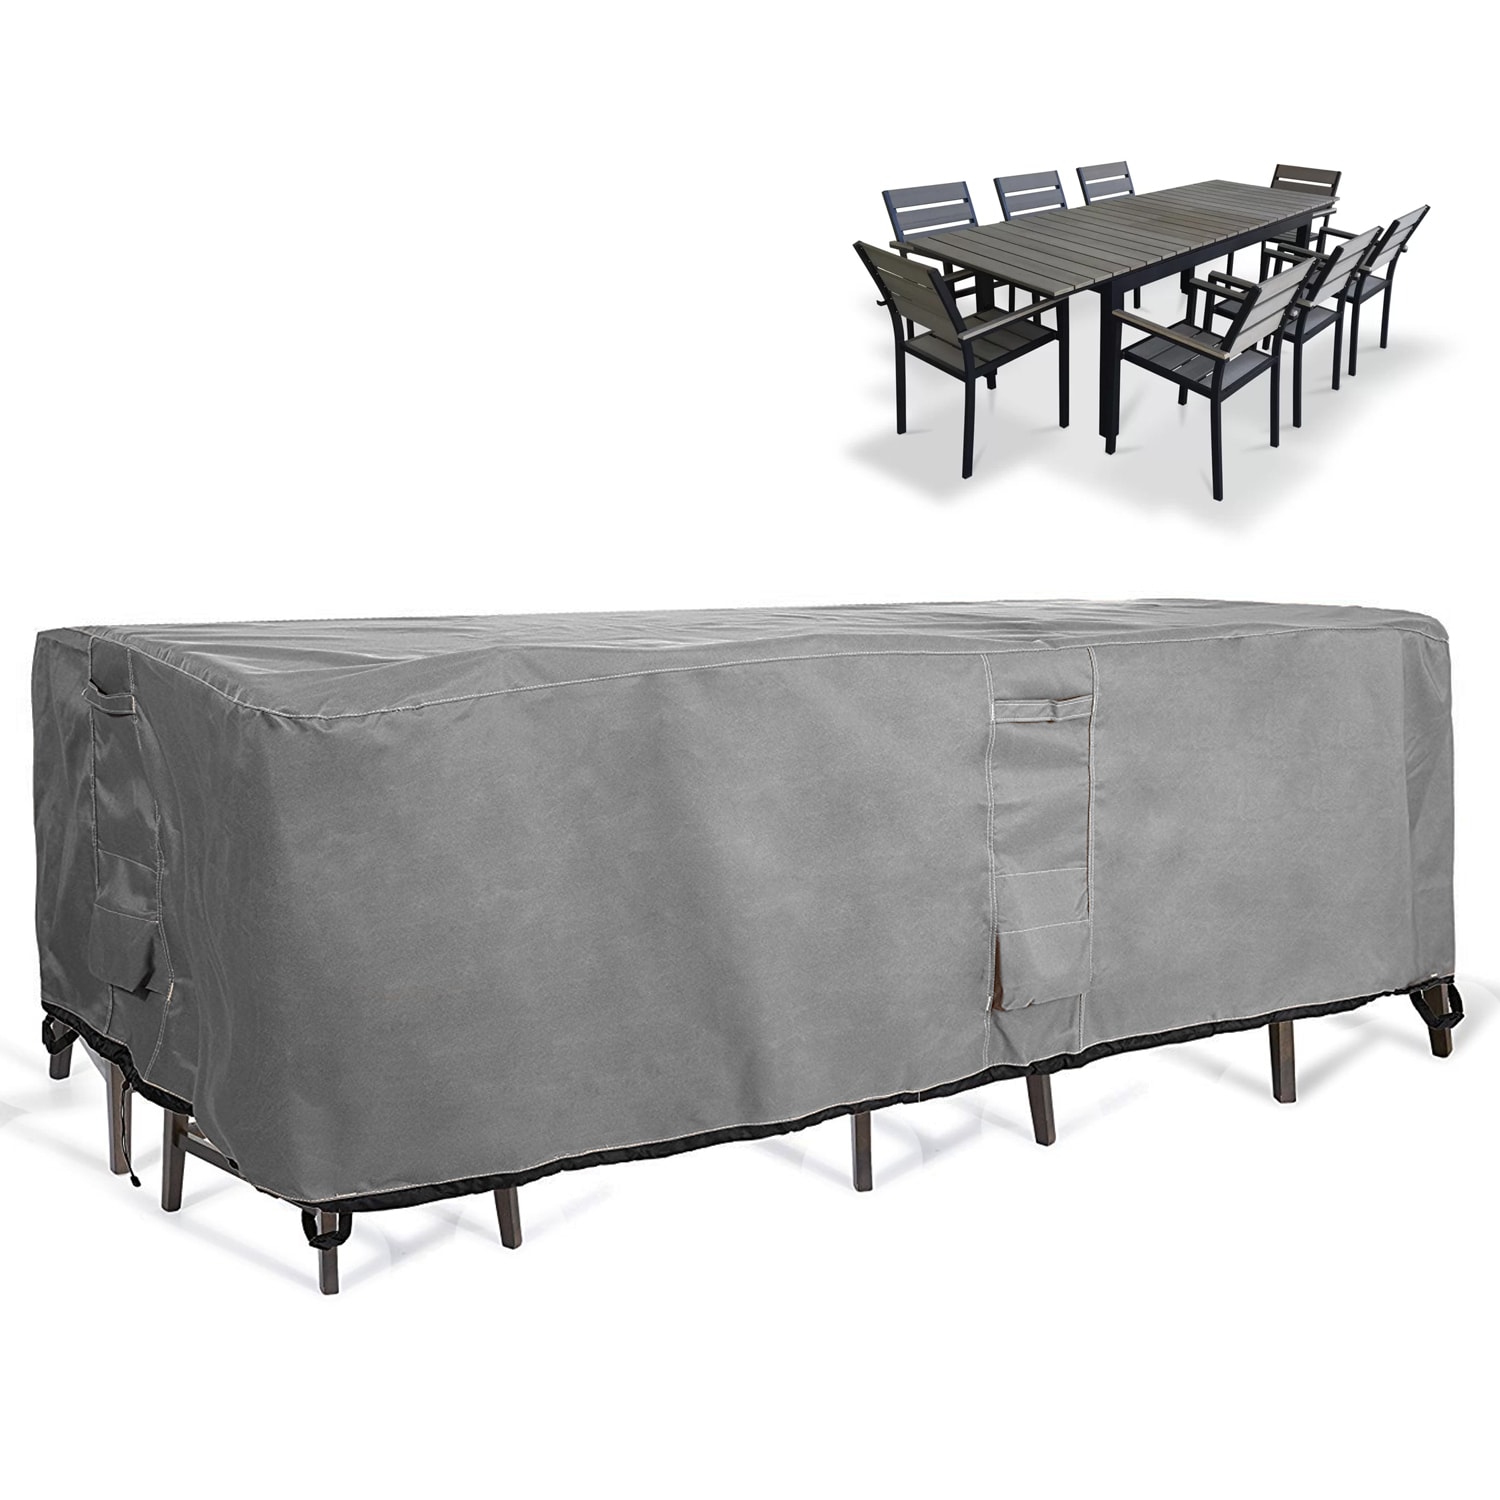 Garden Furniture Cover Patio Outdoor Table Chair Set UV Cover Dust Waterproof 3